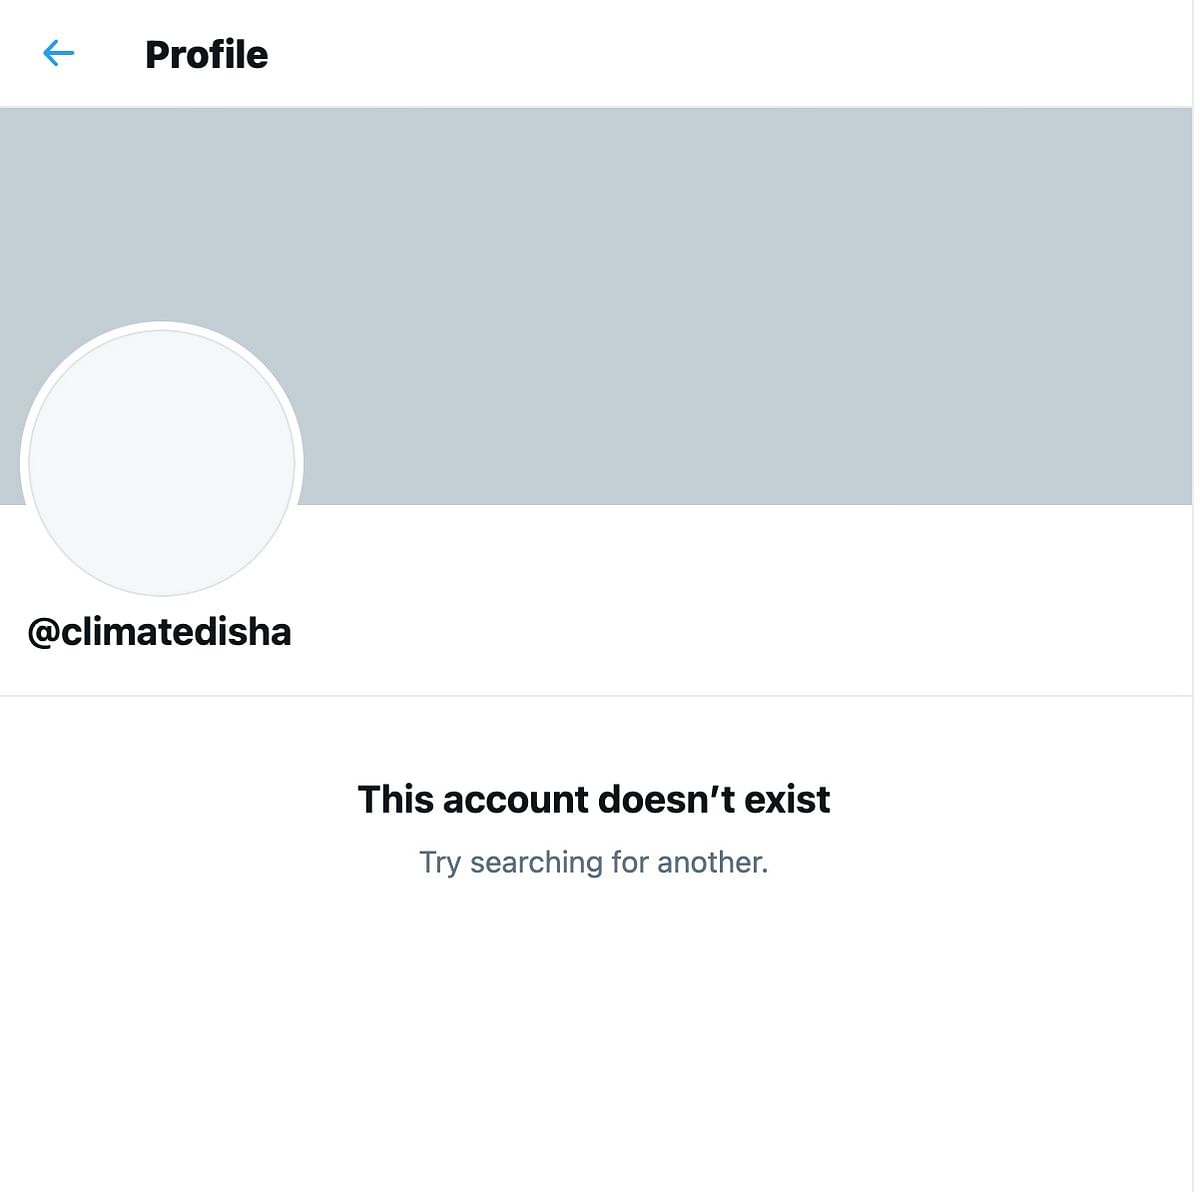 Here’s a look at a few Twitter accounts that have come up claiming to be climate activist Disha Ravi. 